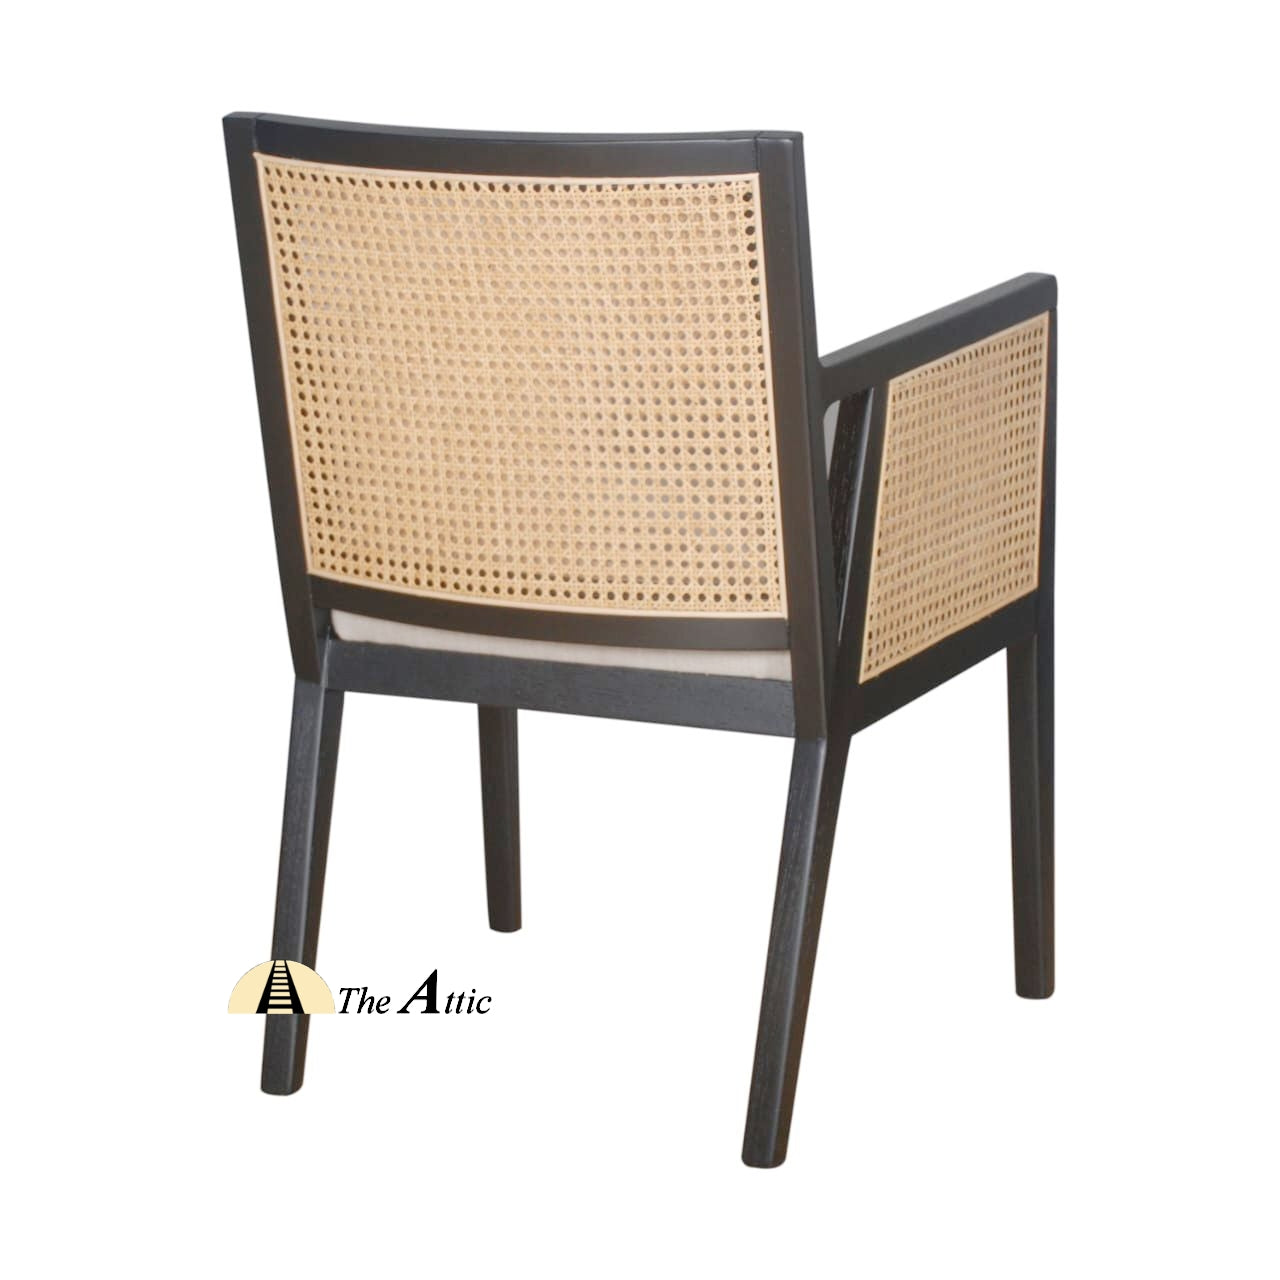 Kyoto Wooden Armchair with Rattan Back and Sides and Upholstered Seat, Mid-Century Modern Oak Wood and Rattan Chair - The Attic Dubai